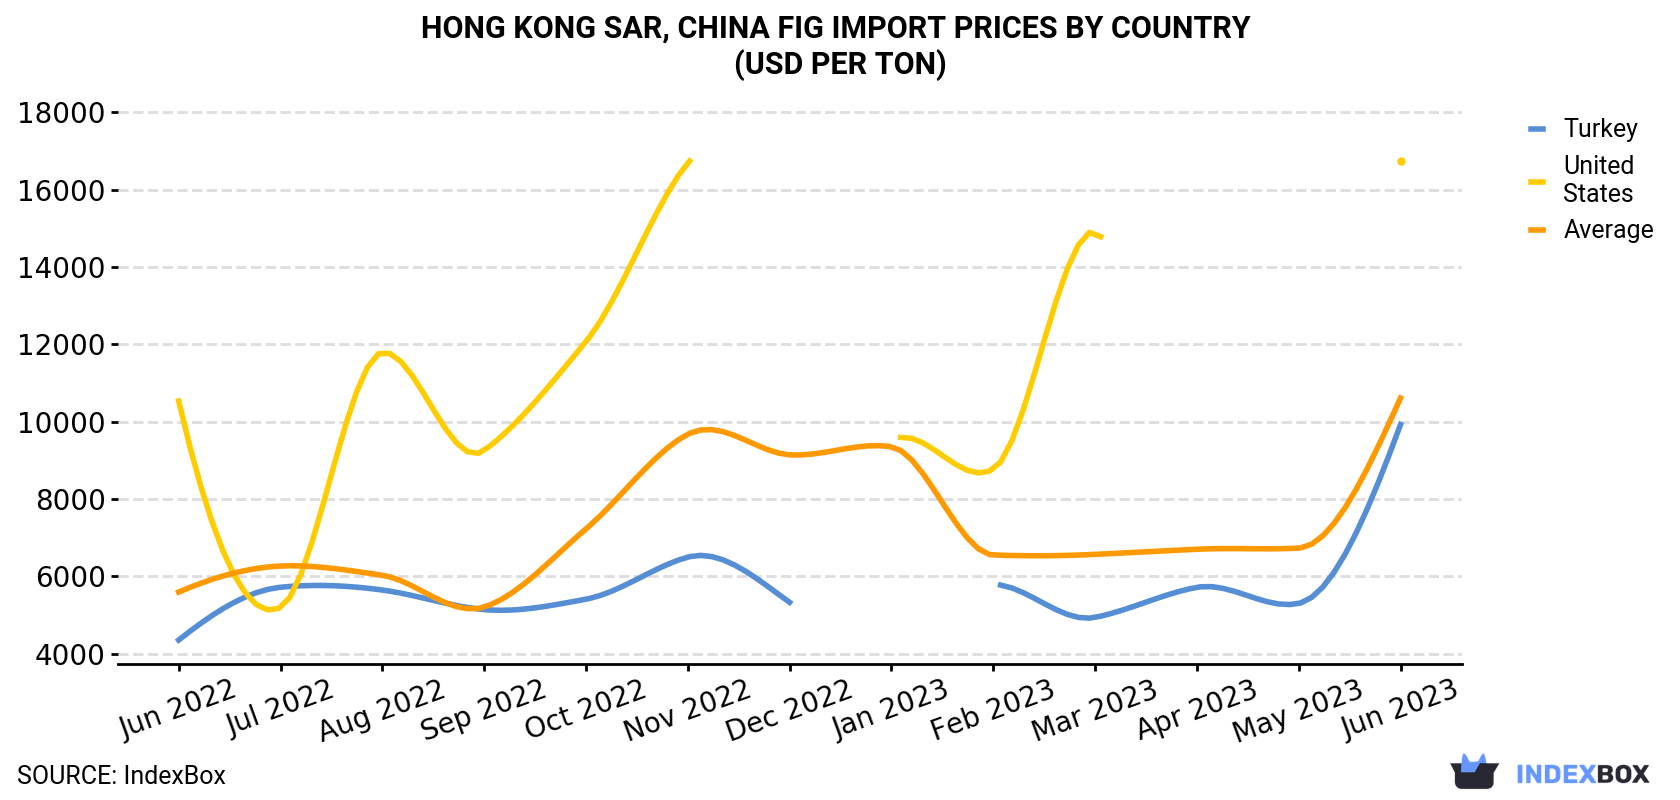 Hong Kong Fig Import Prices By Country (USD Per Ton)